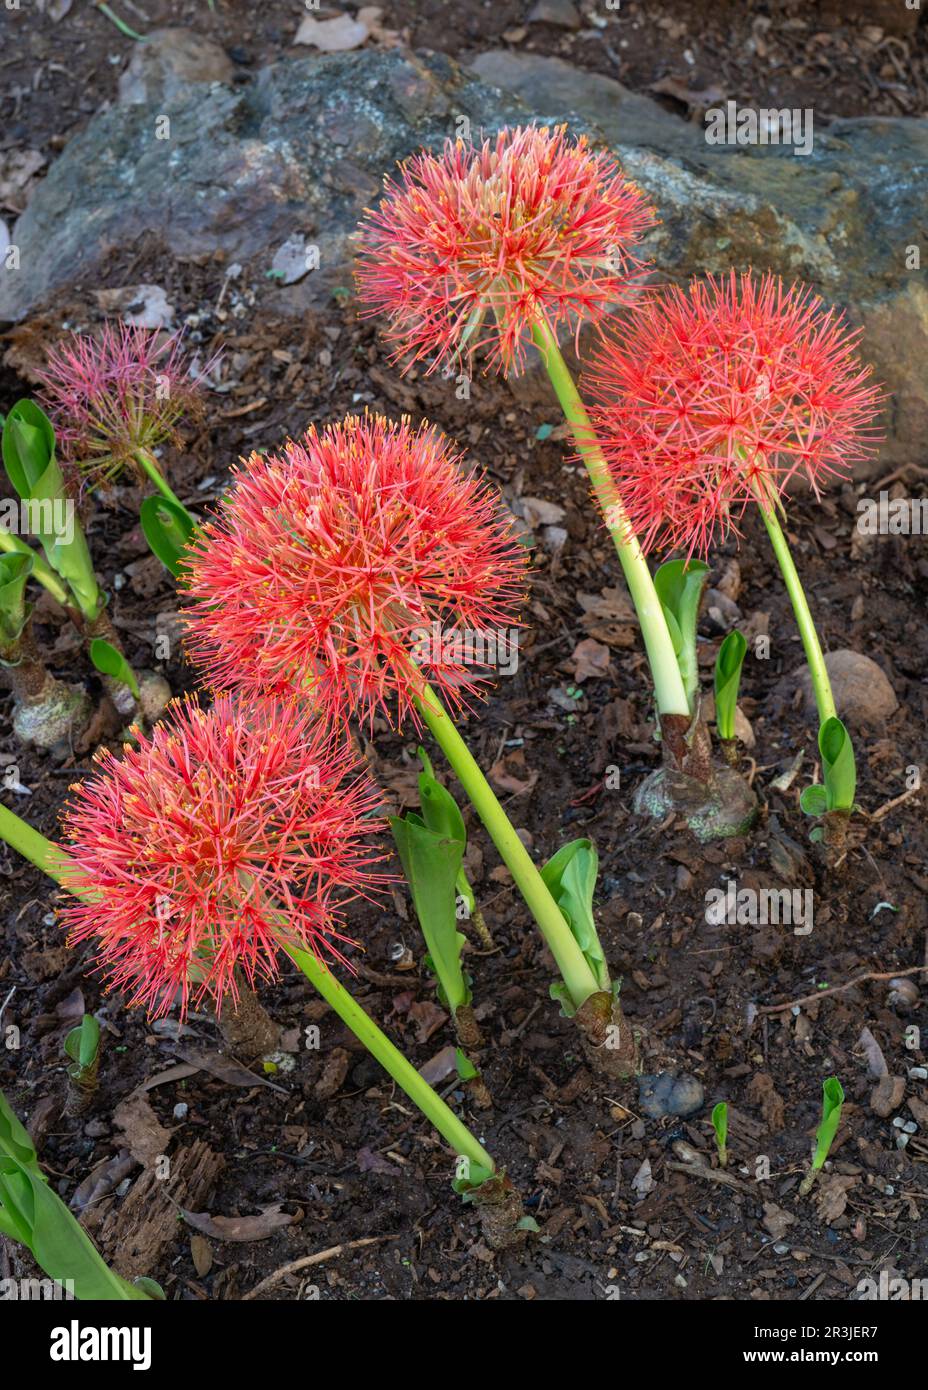 Closeup vertical view of fresh orange red flowers of scadoxus multiflorus aka blood lily blooming outdoors in tropical garden Stock Photo